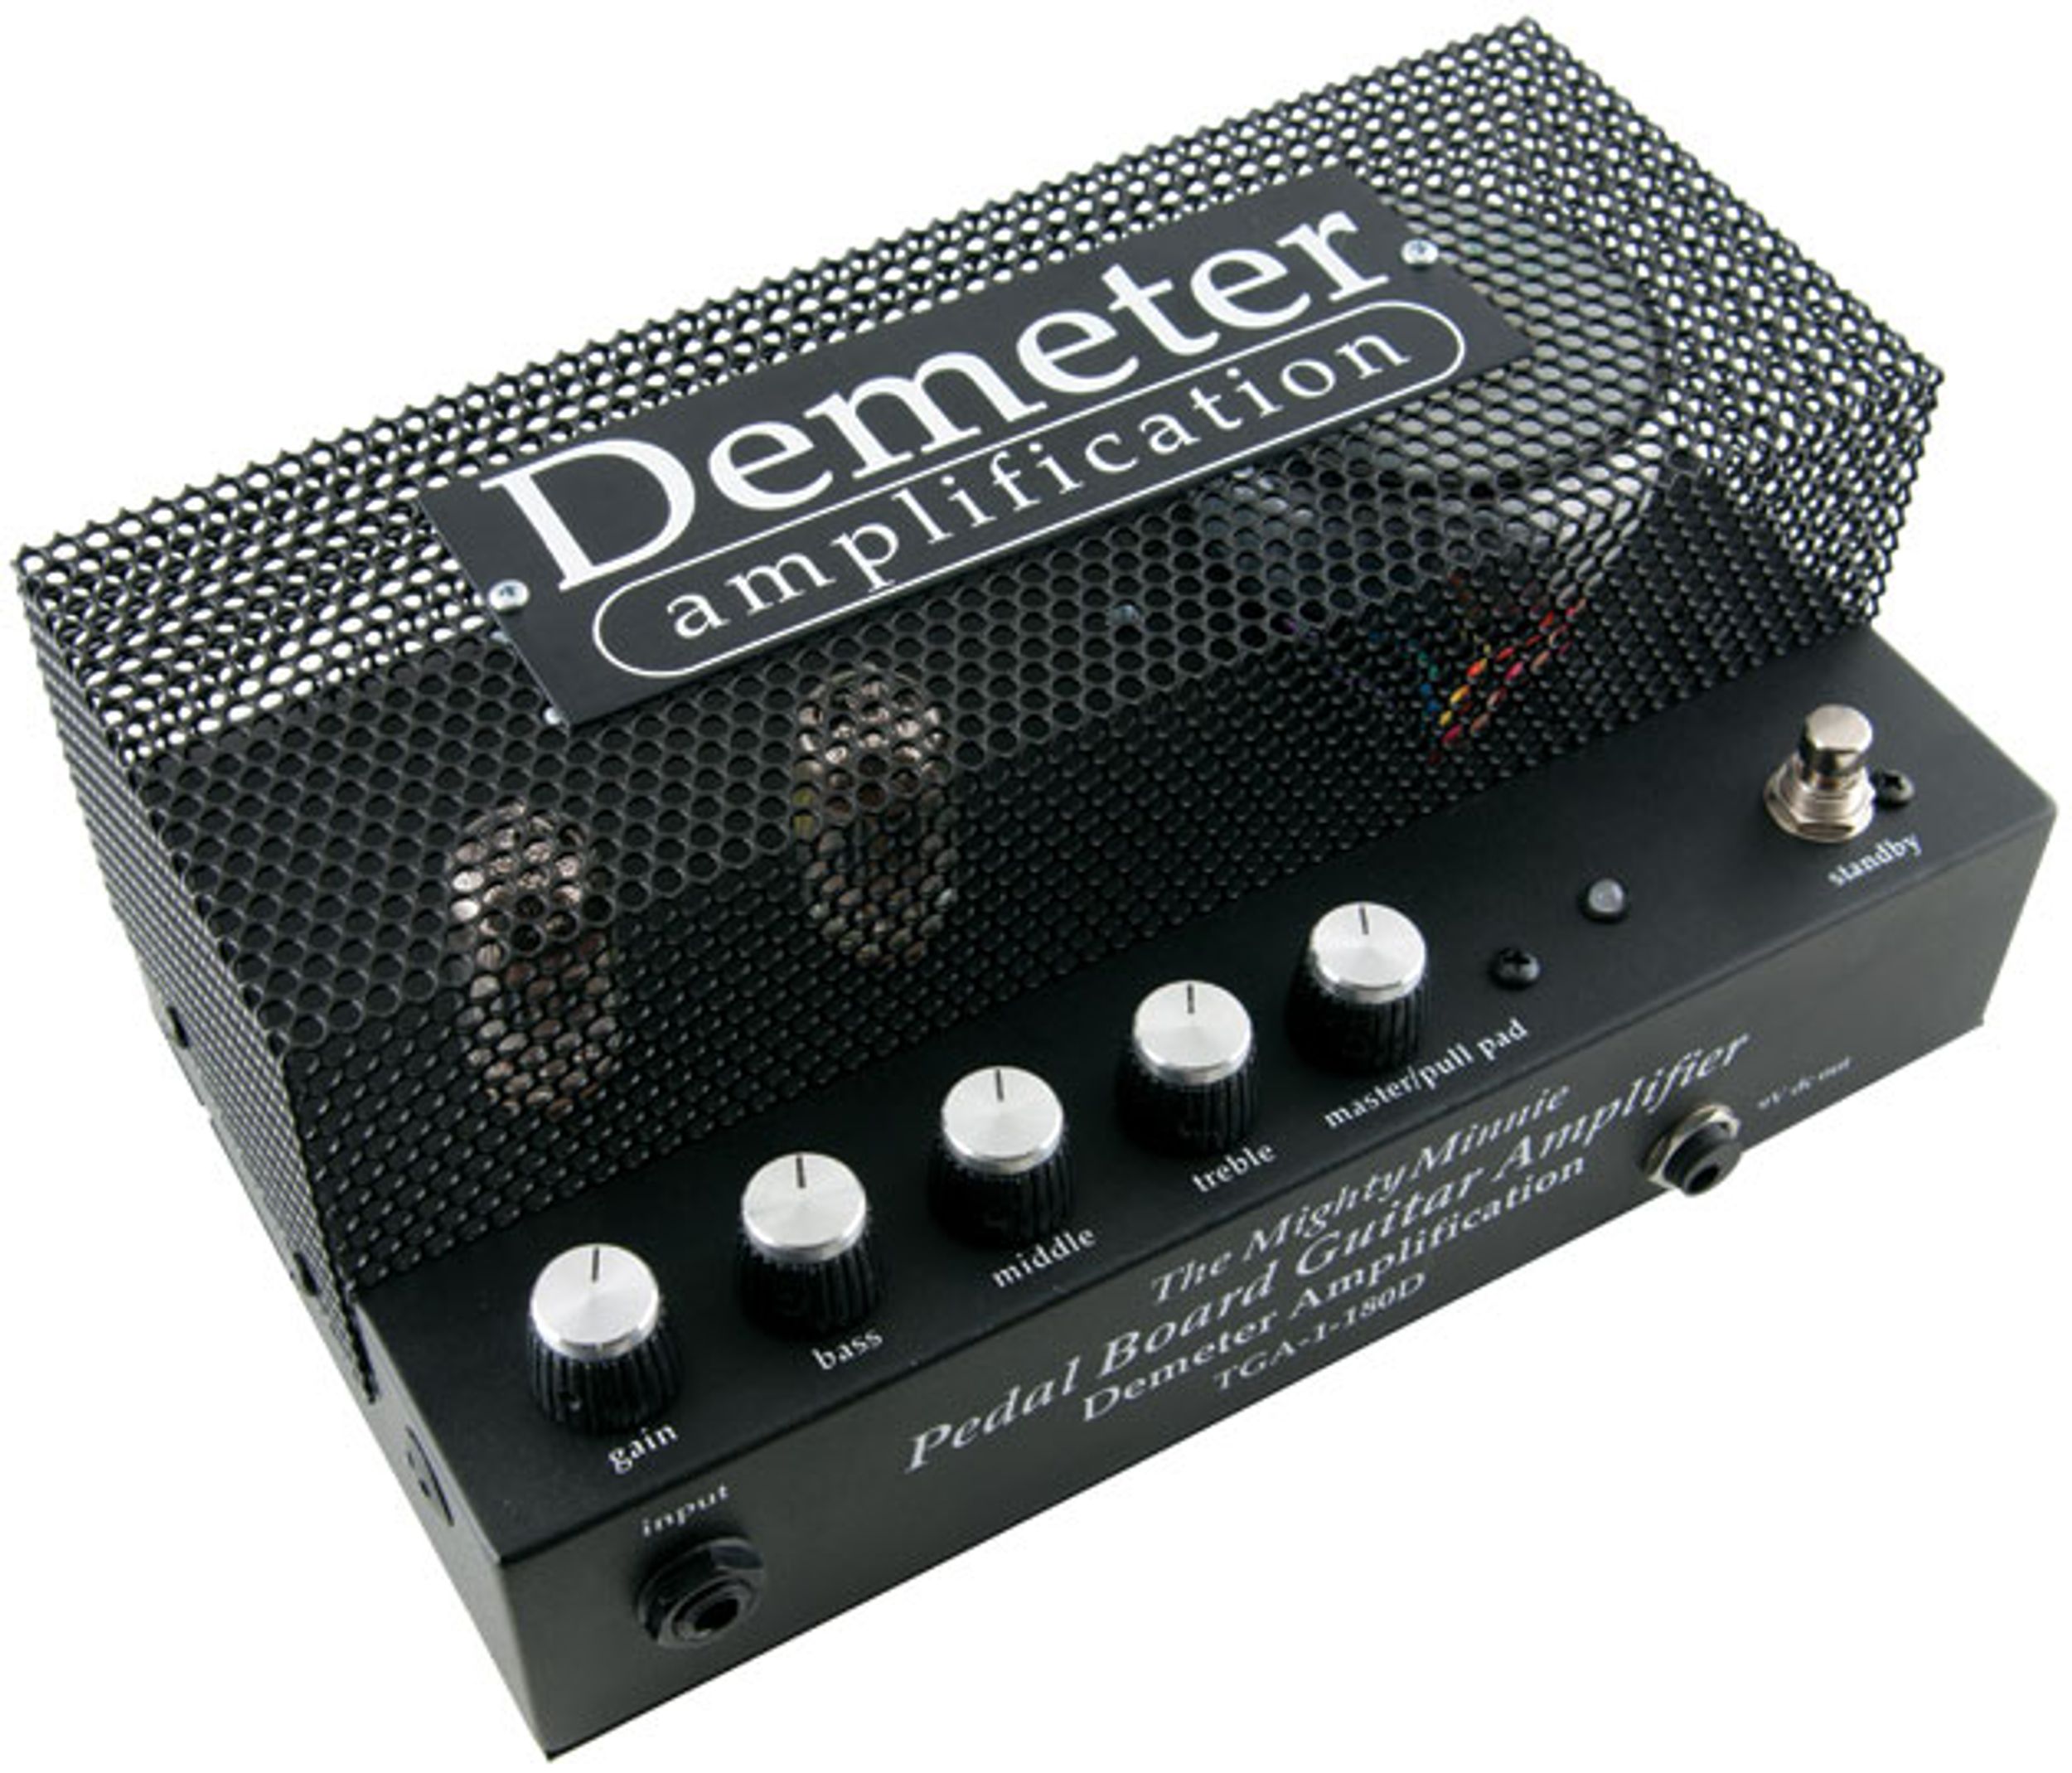 Quick Hit: Demeter TGA-1-180D Mighty Minnie Review